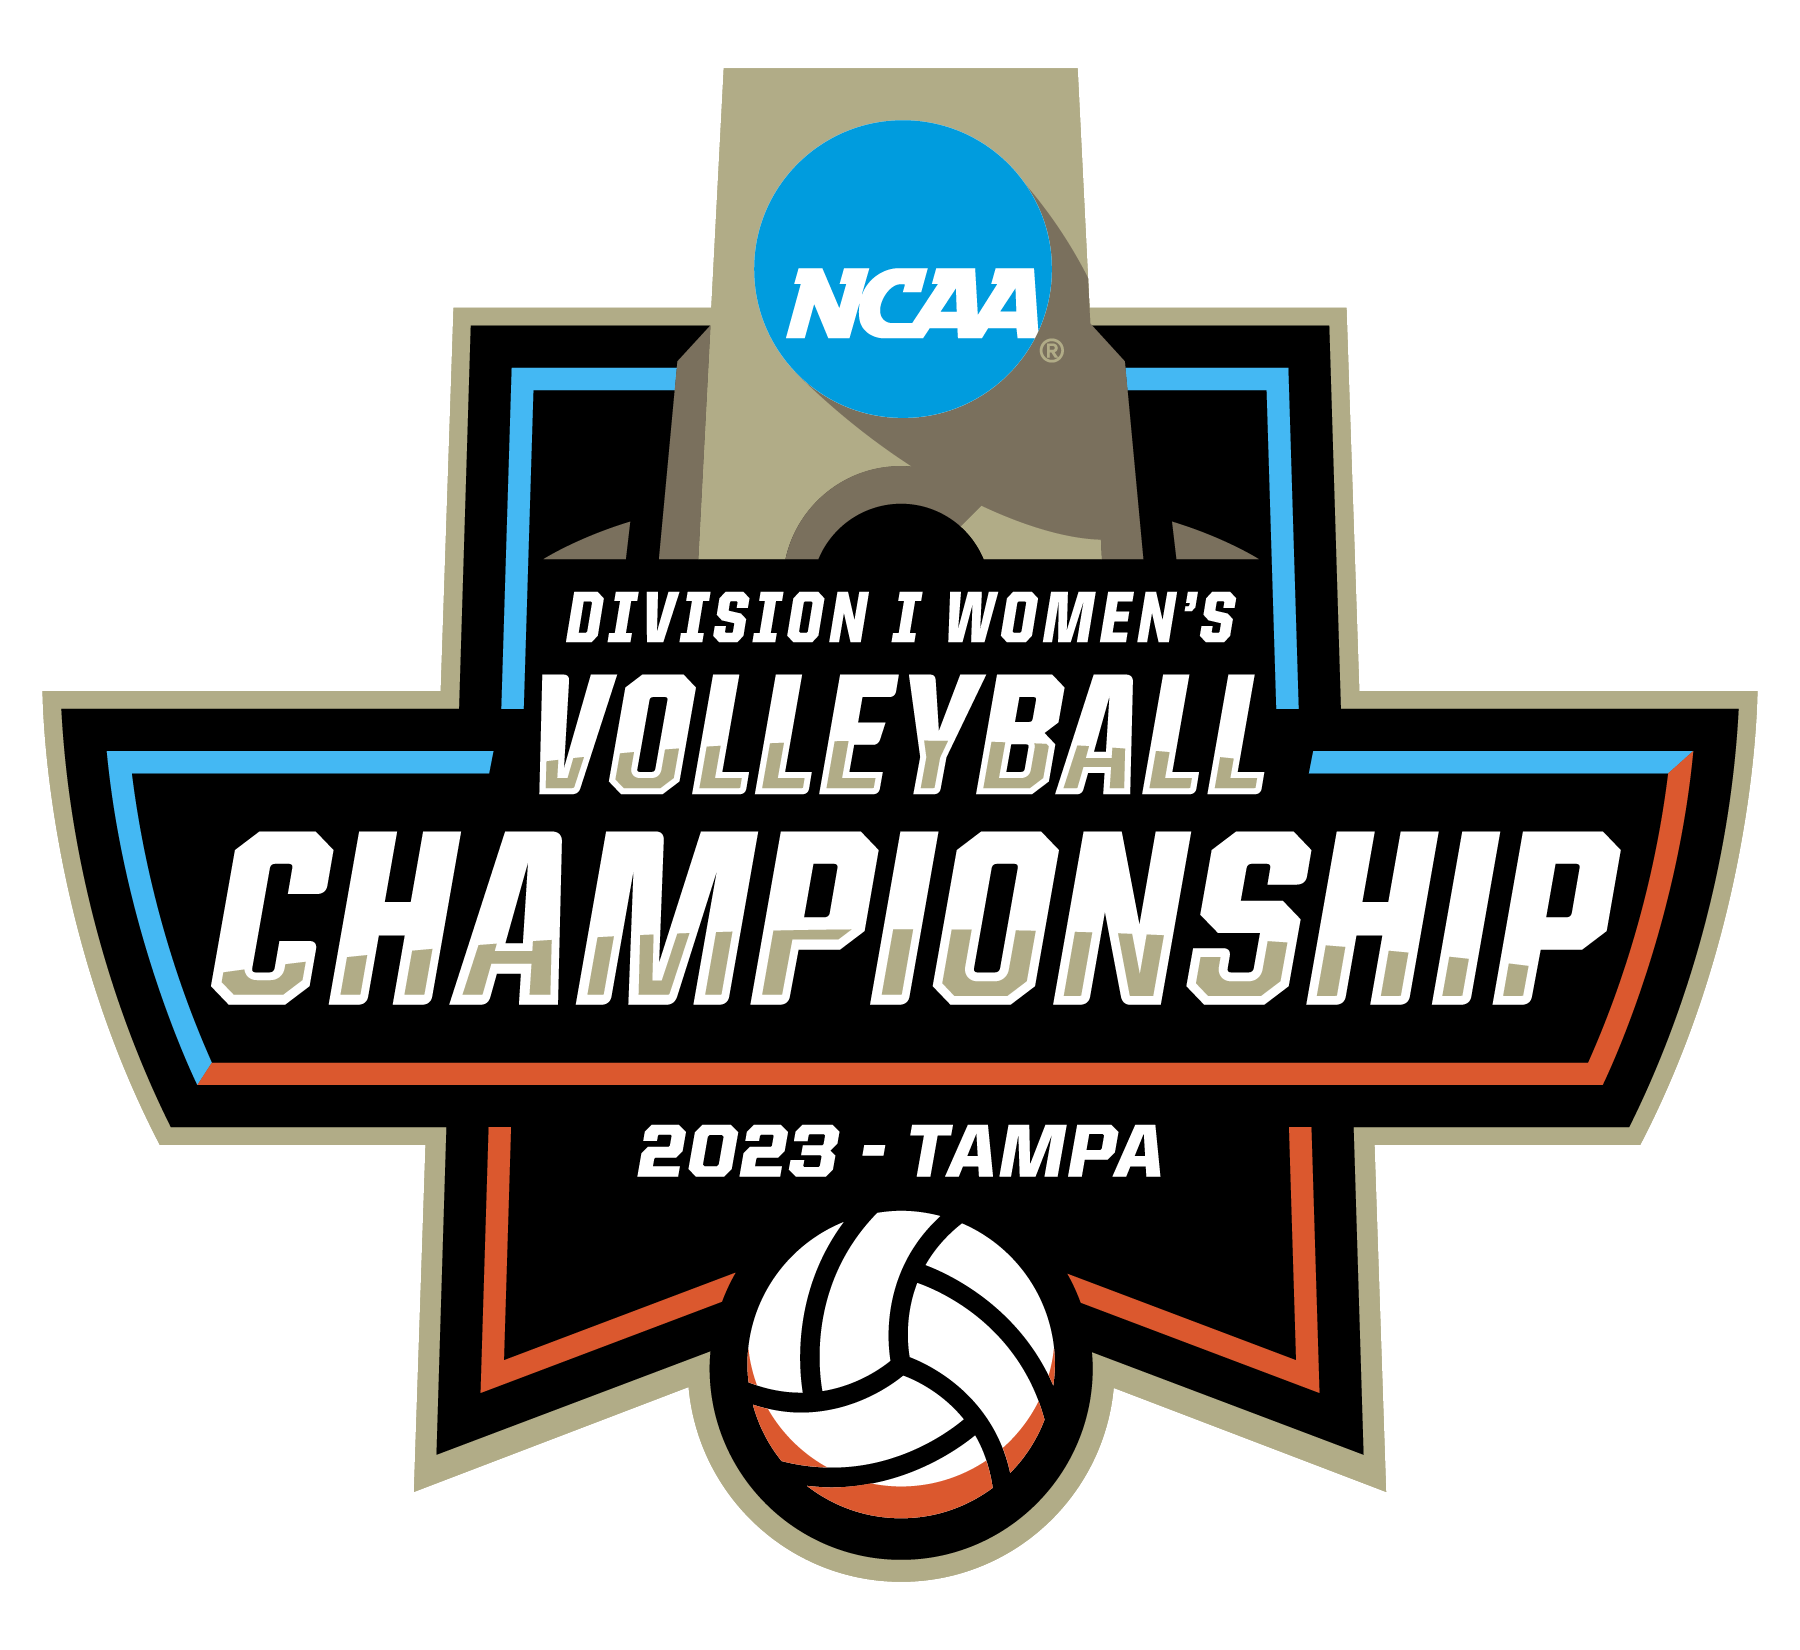 2023 Division I Women's Volleyball